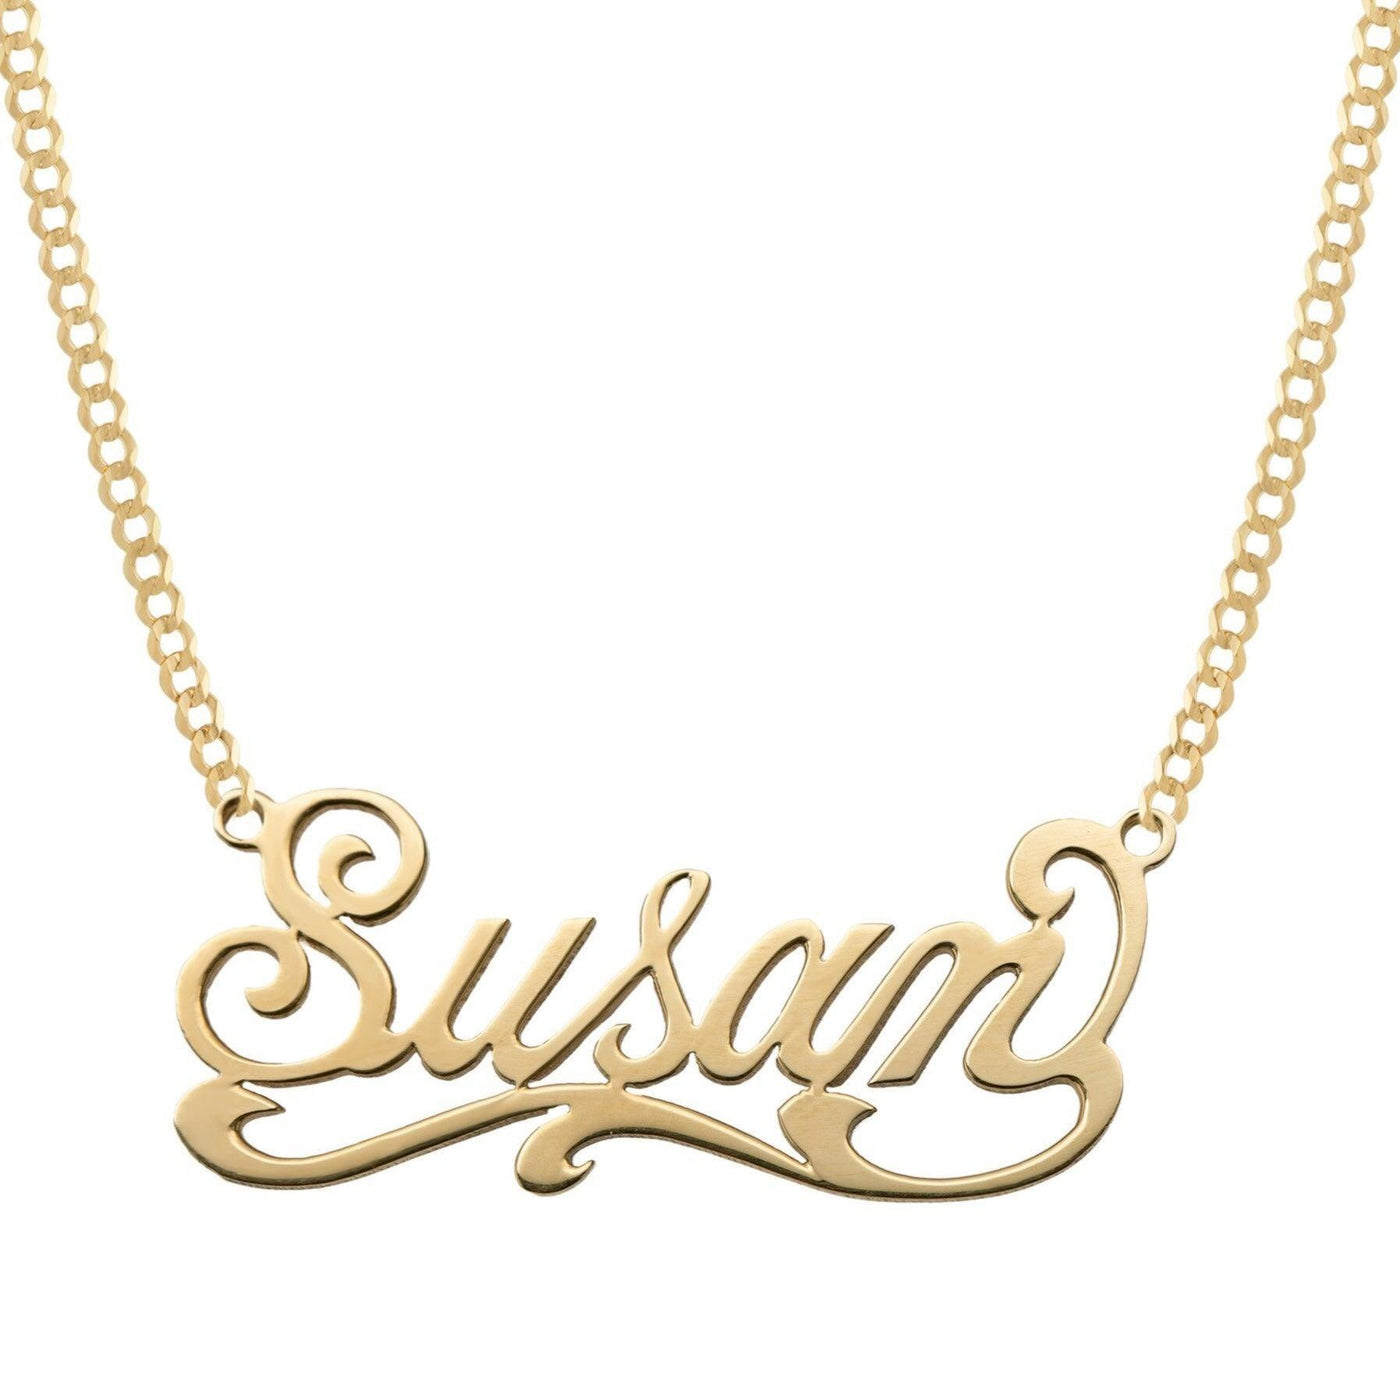 Ladies Script Name Plate Necklace 14K Gold - Style 59 - bayamjewelry